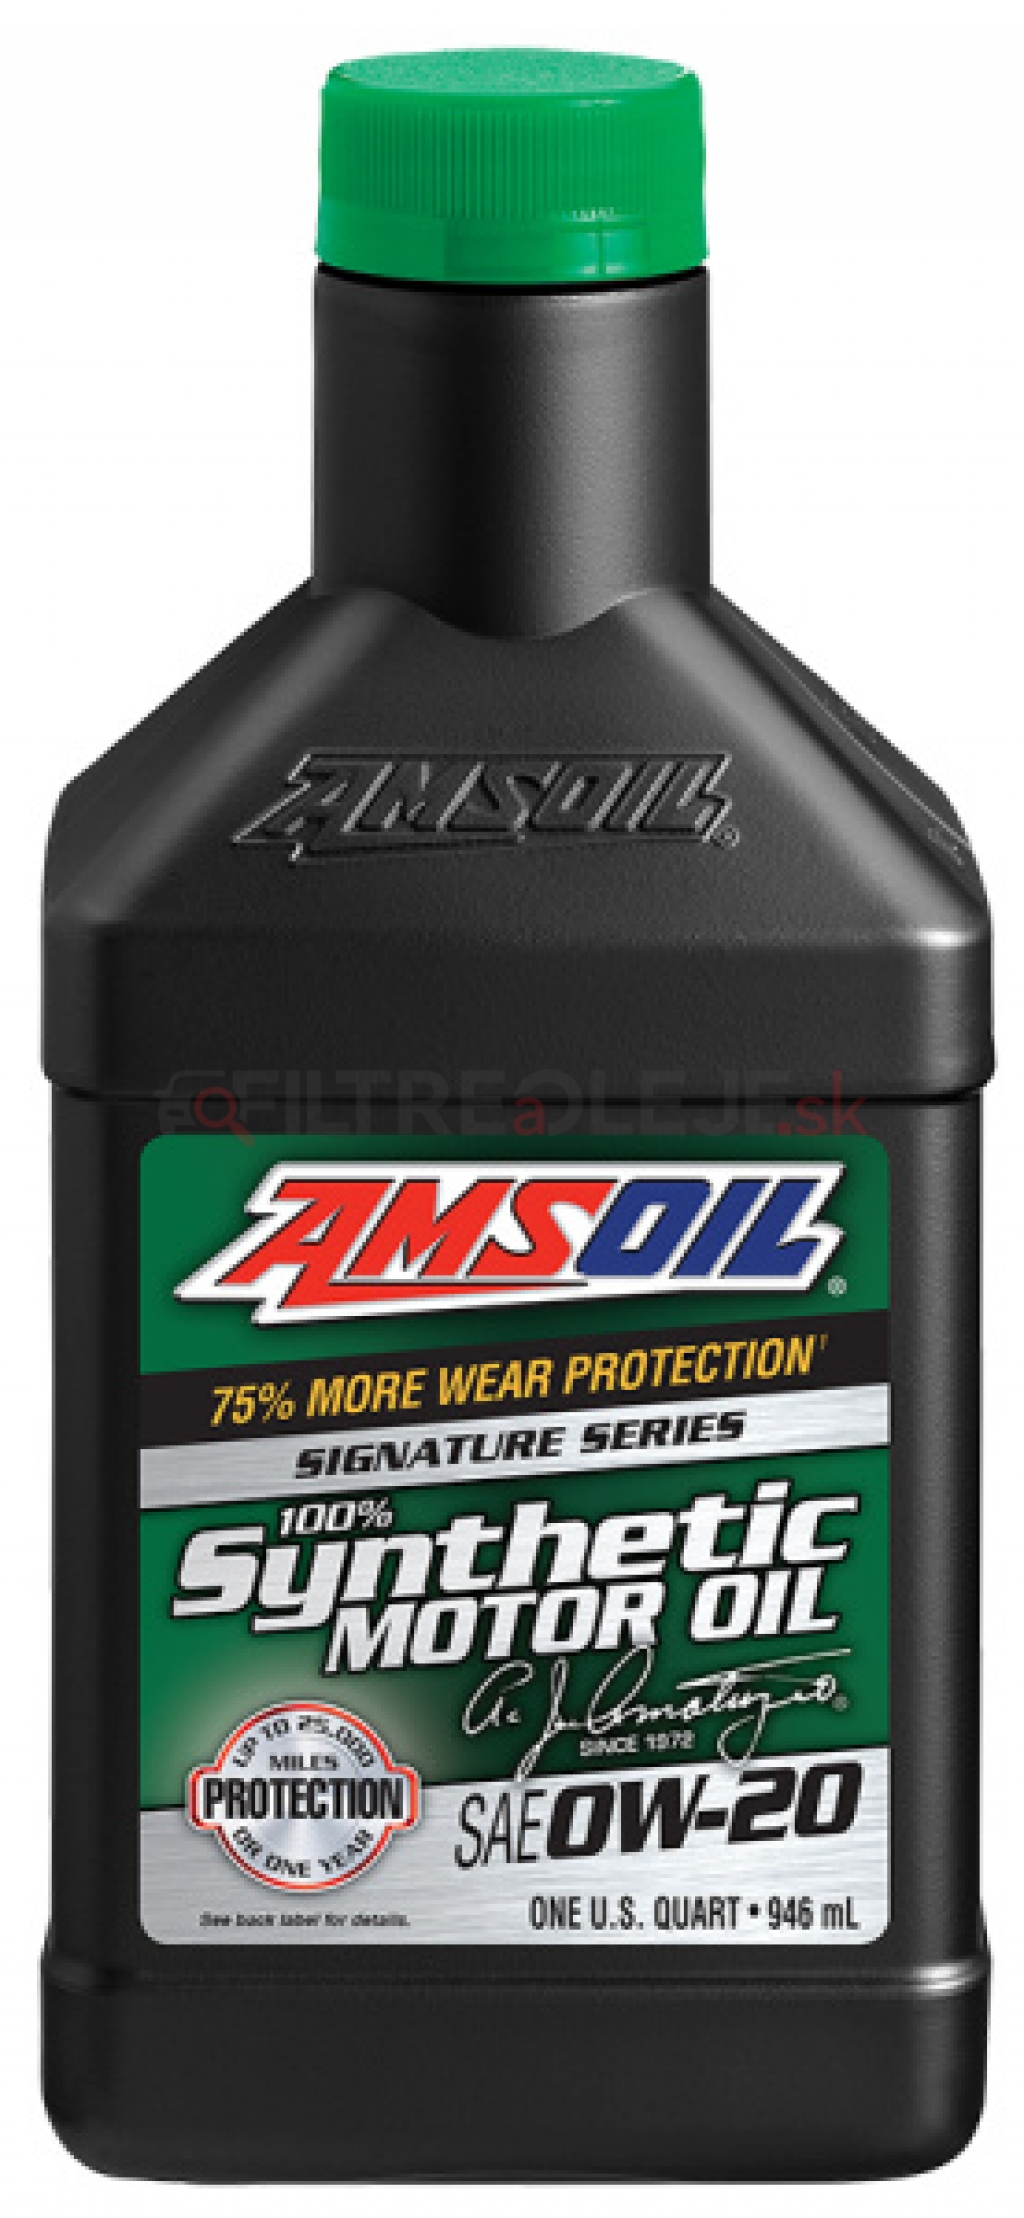 AMSOIL 0w20. Моторное масло AMSOIL asm1g. AMSOIL Dot 3. Масло МГП-10. Signature series synthetic